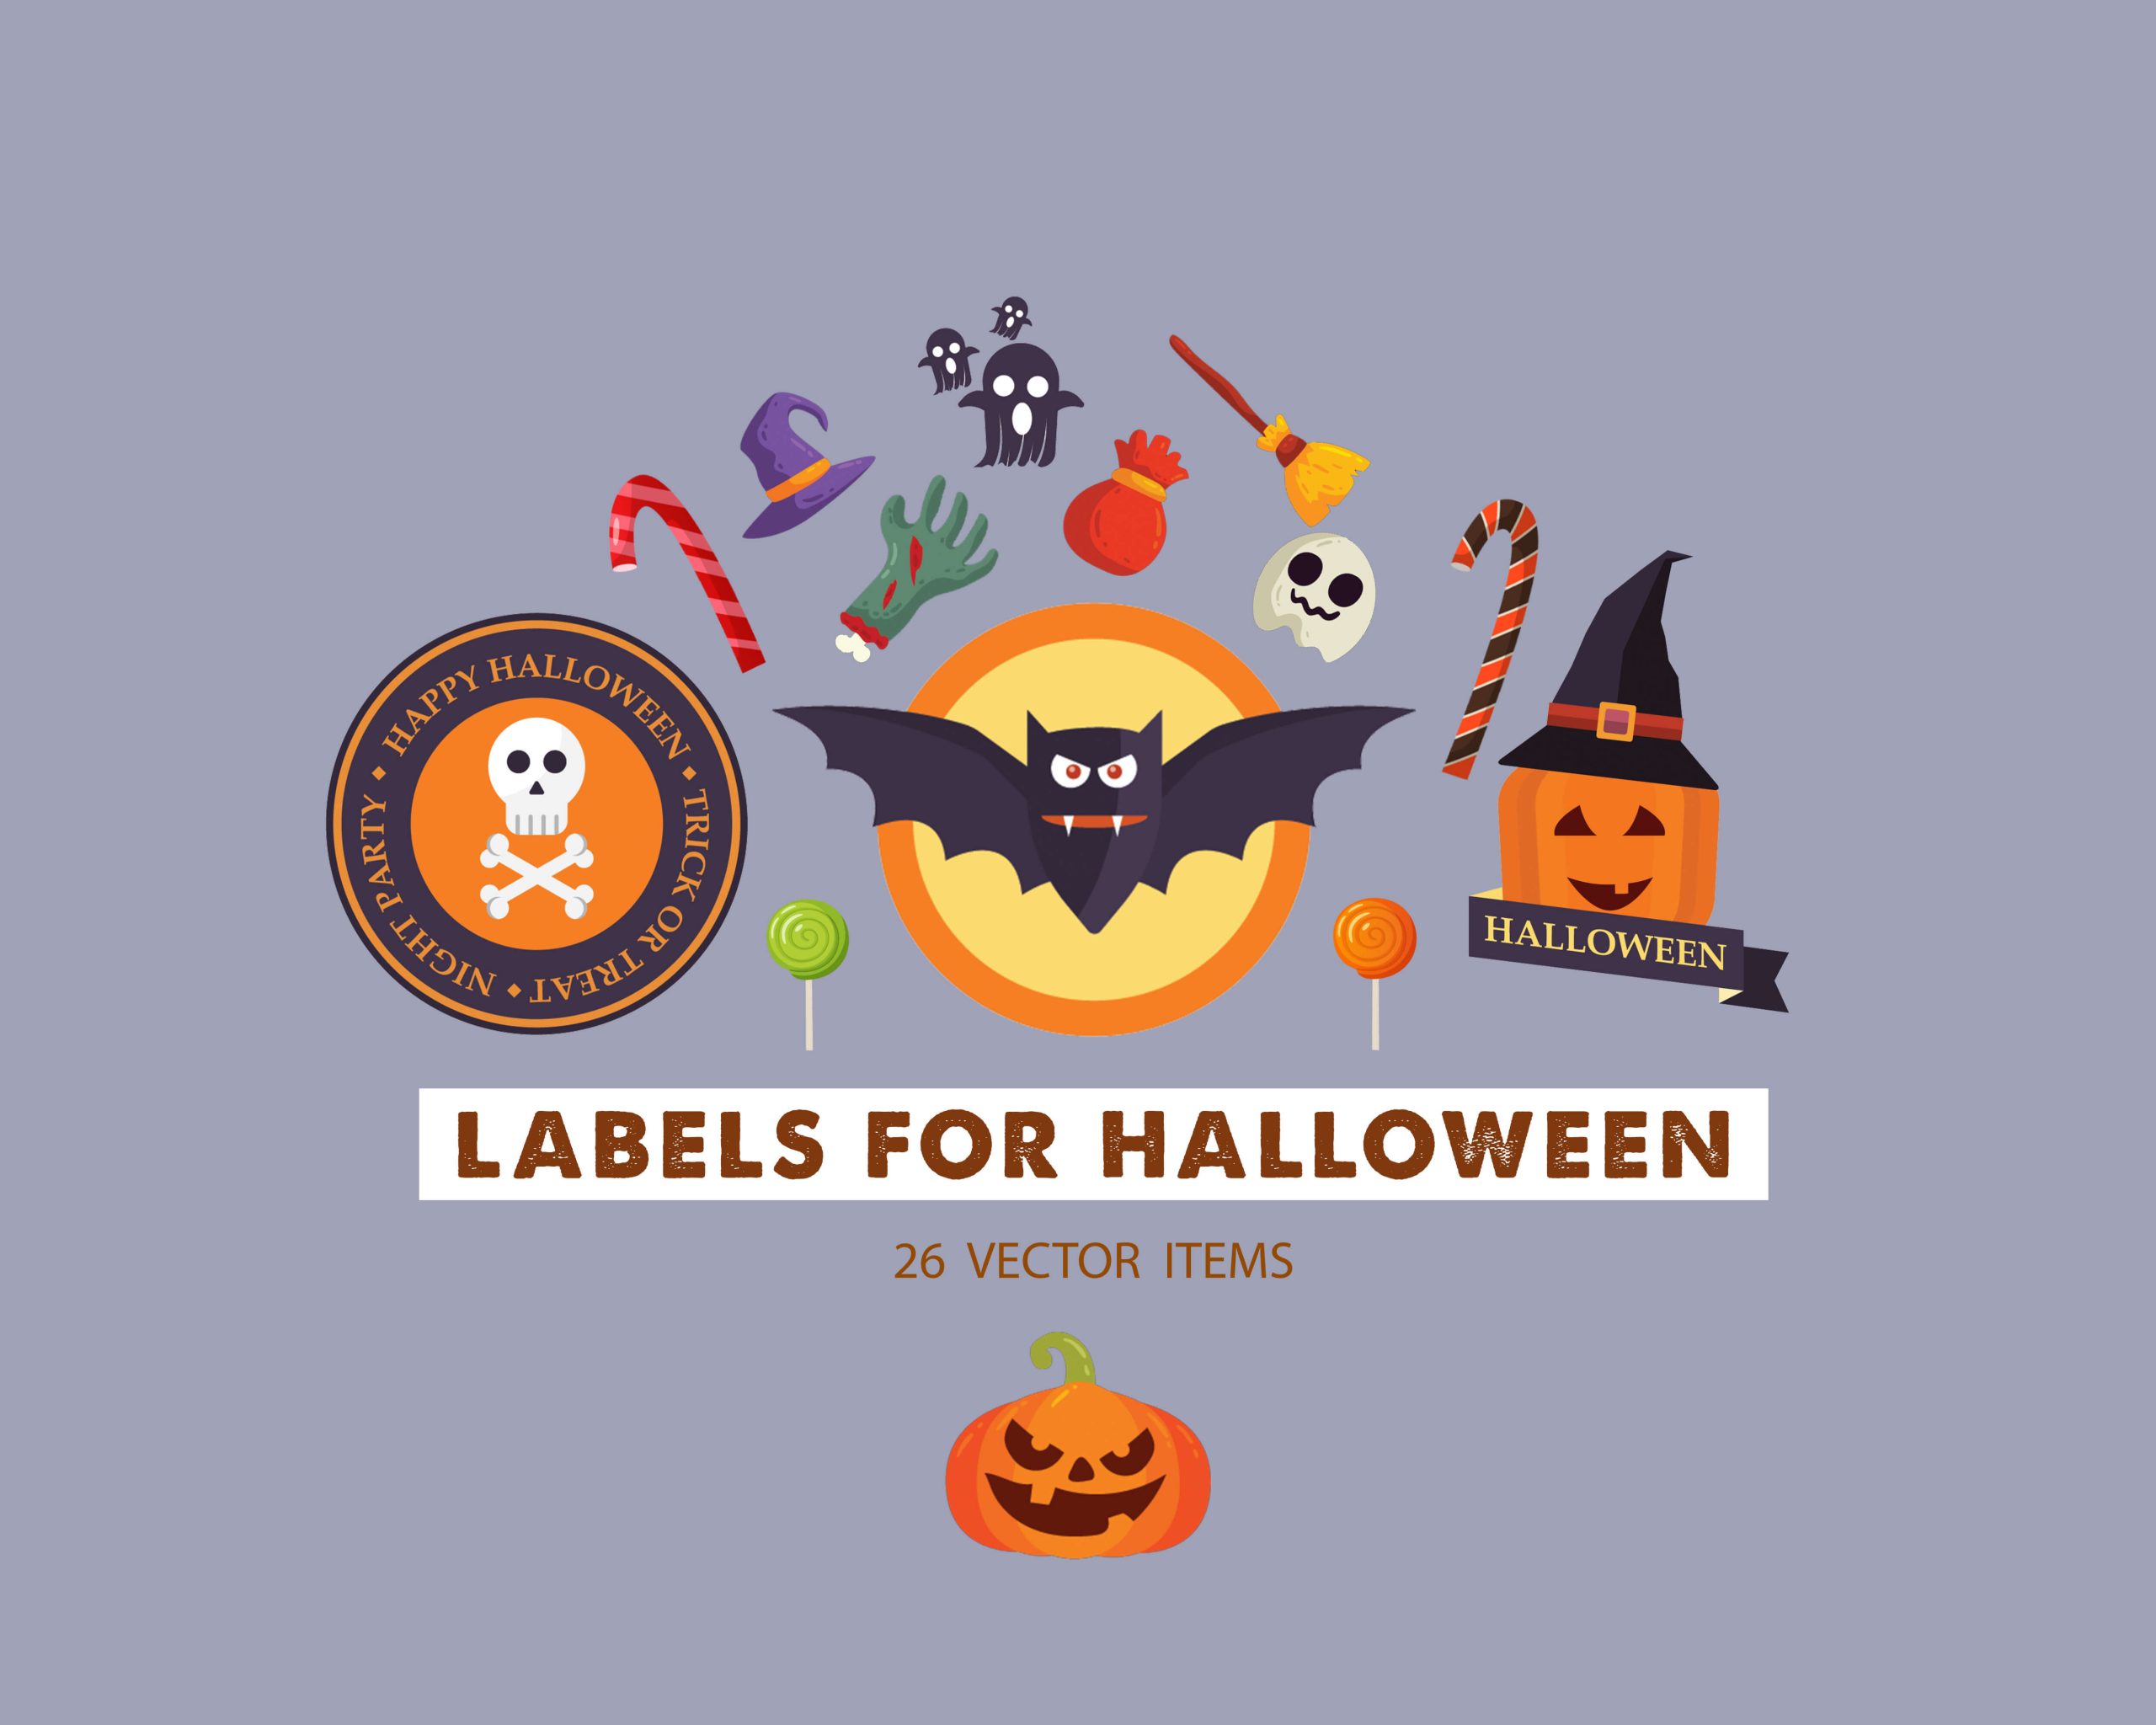 Labels for Halloween